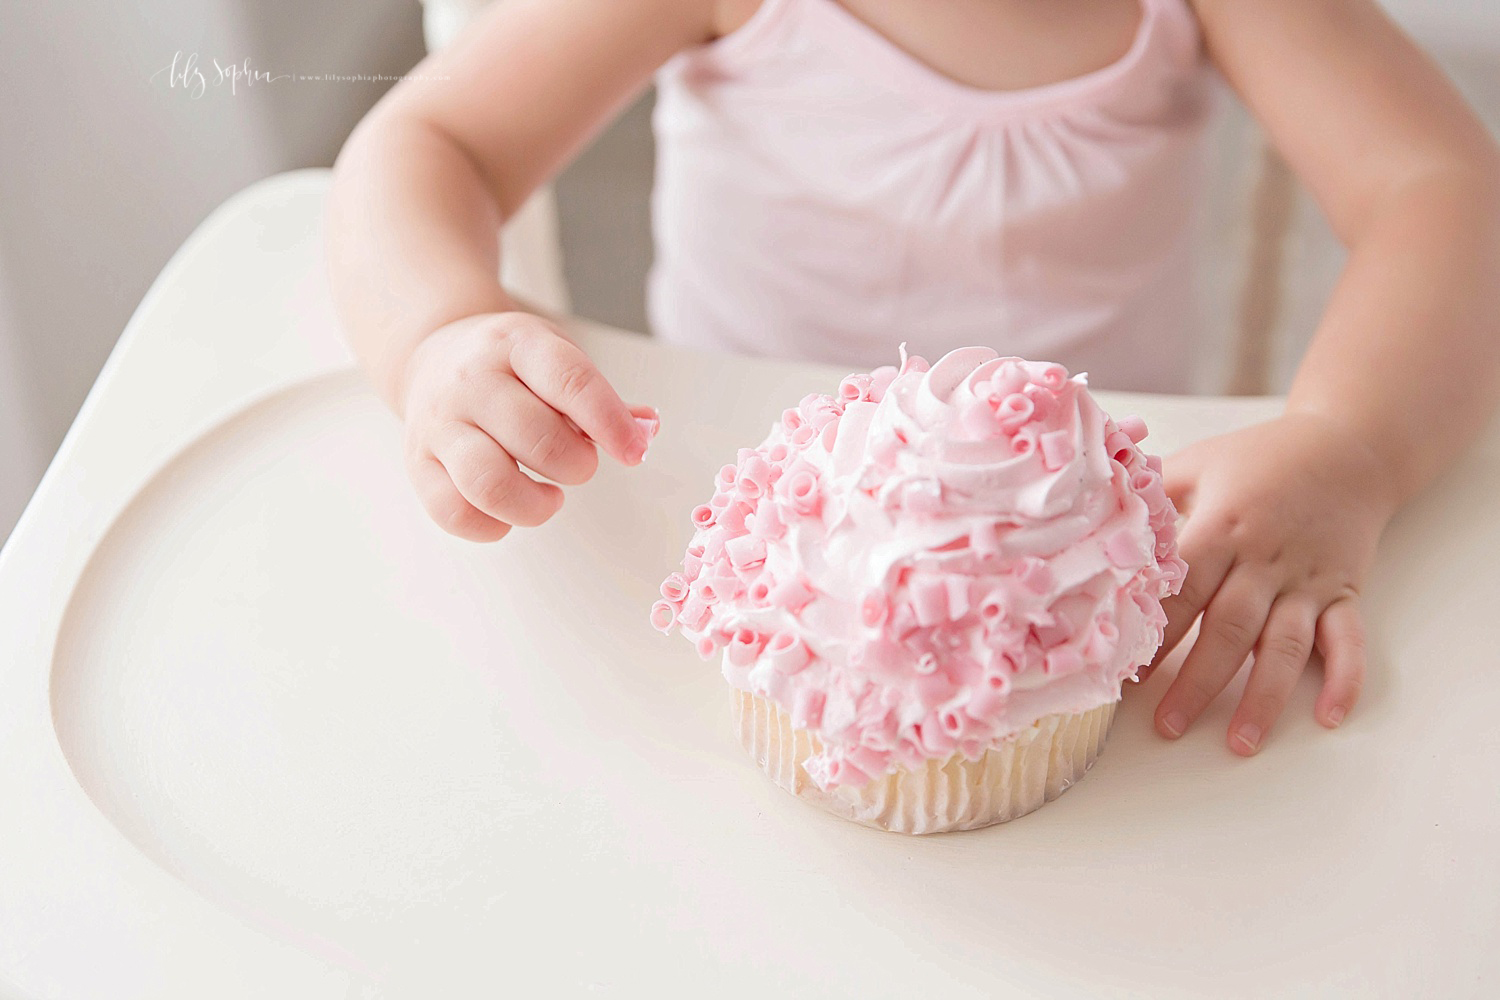  Close up Image of a pink, ruffled, cupcake on a wooden high chair tray, with little hands read to dig in. 